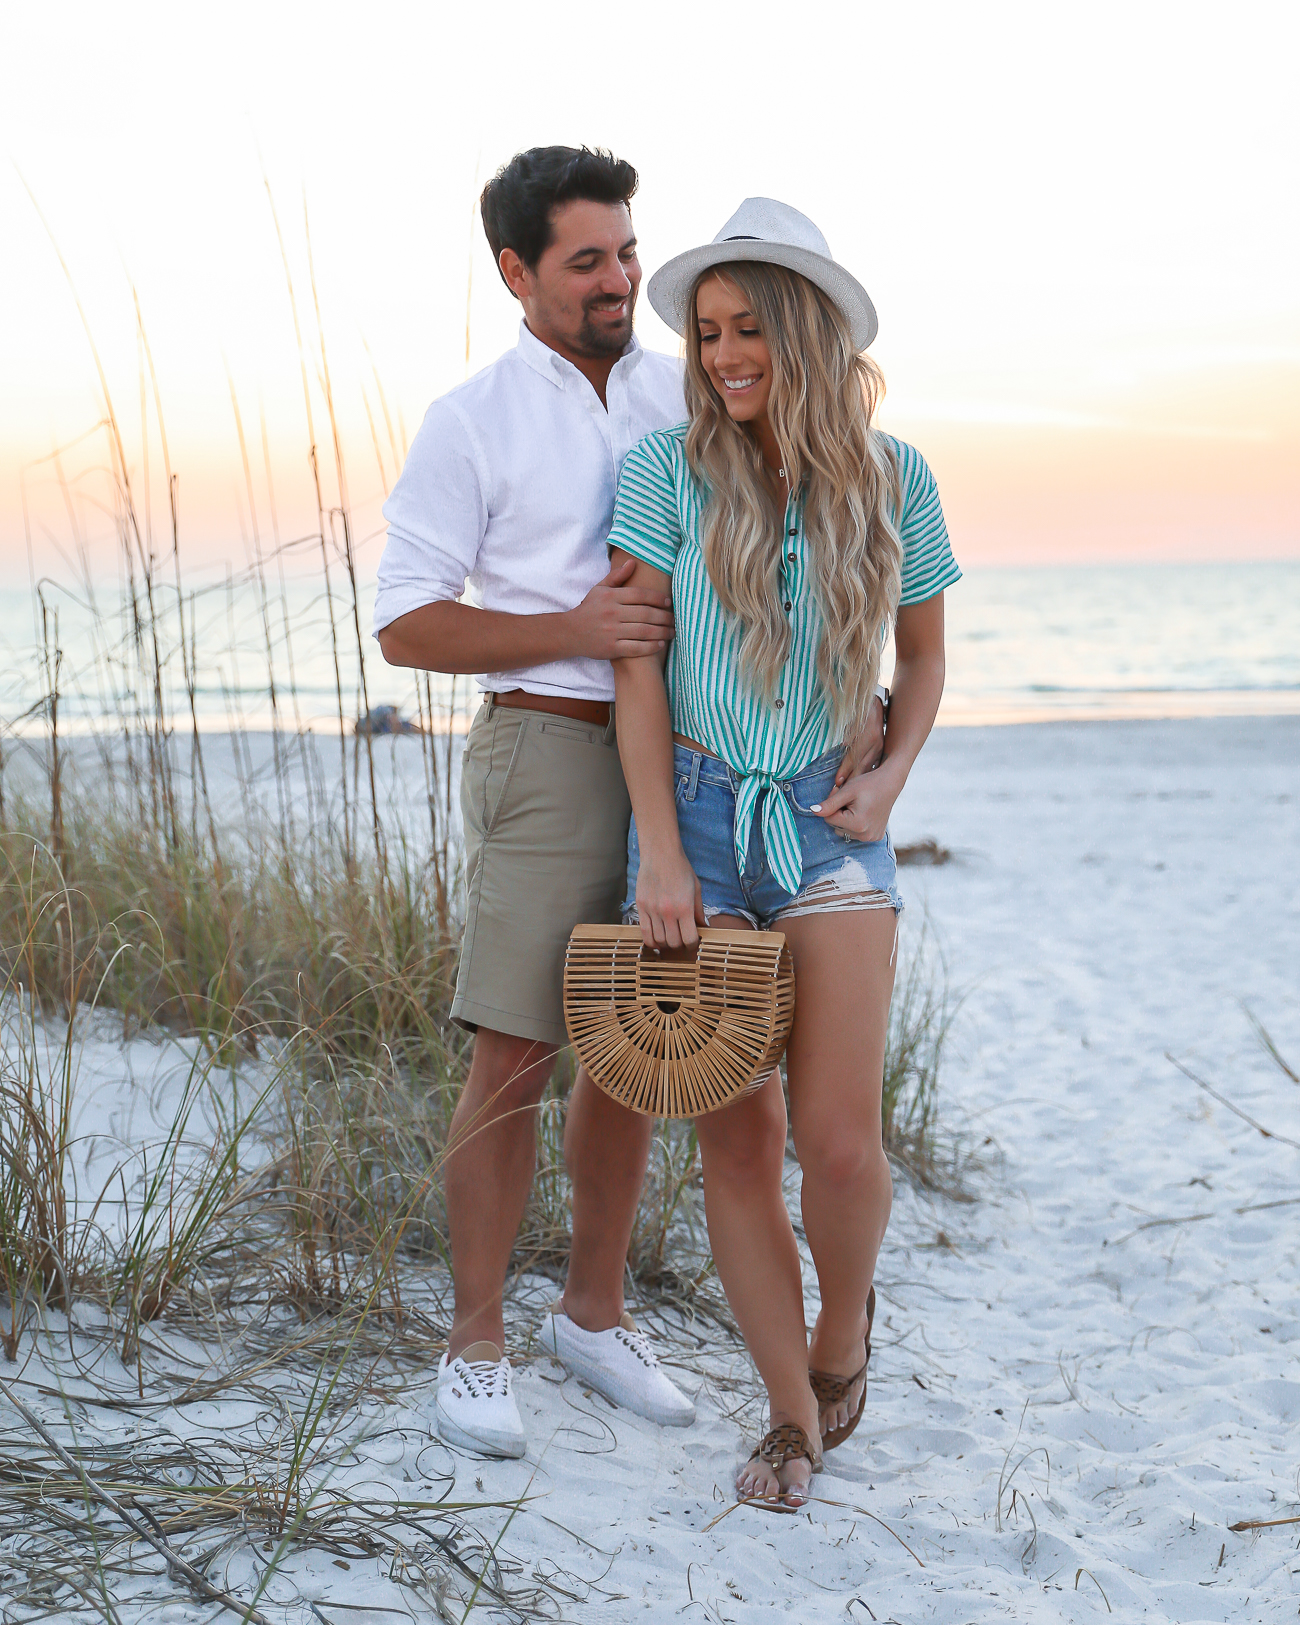 Beach Vacation outfit idea mens beach outfit his & hers couples vacation style Laura Beverlin -2